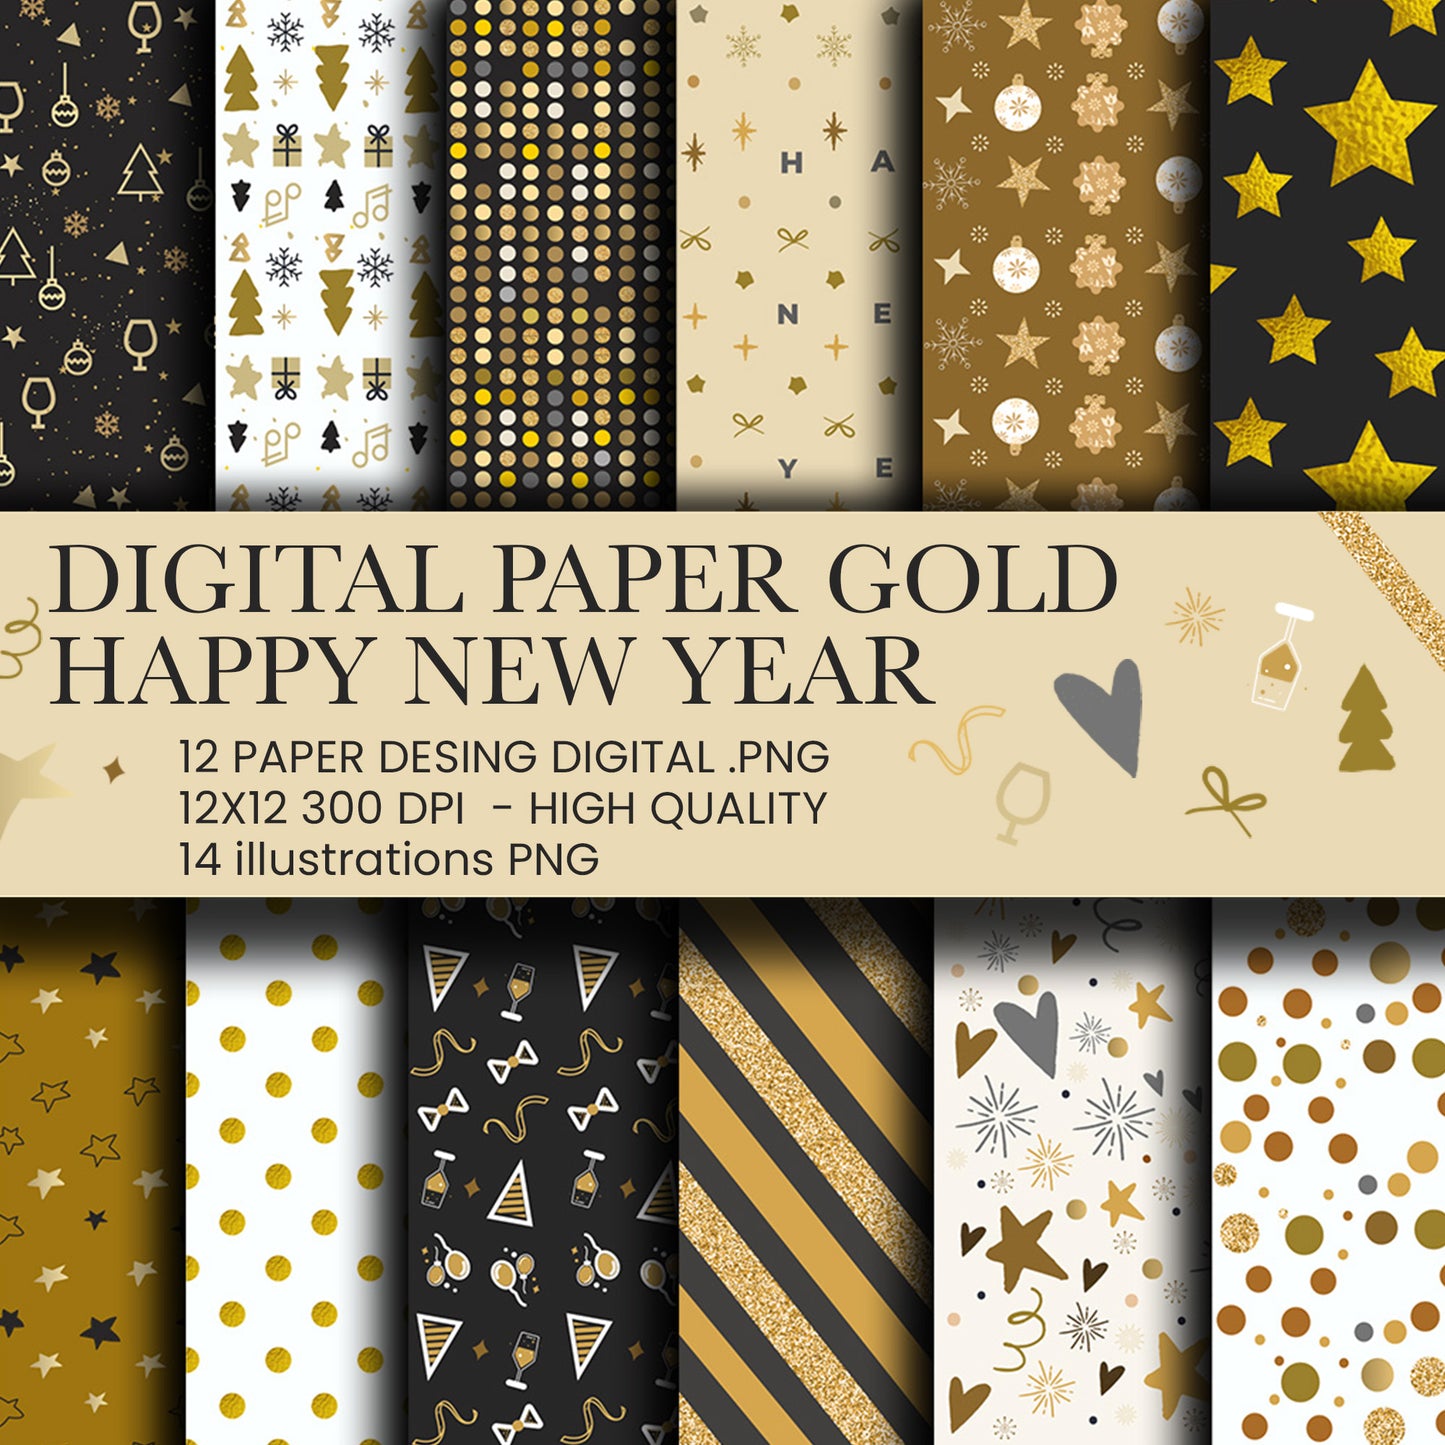 Happy new year Digital papers